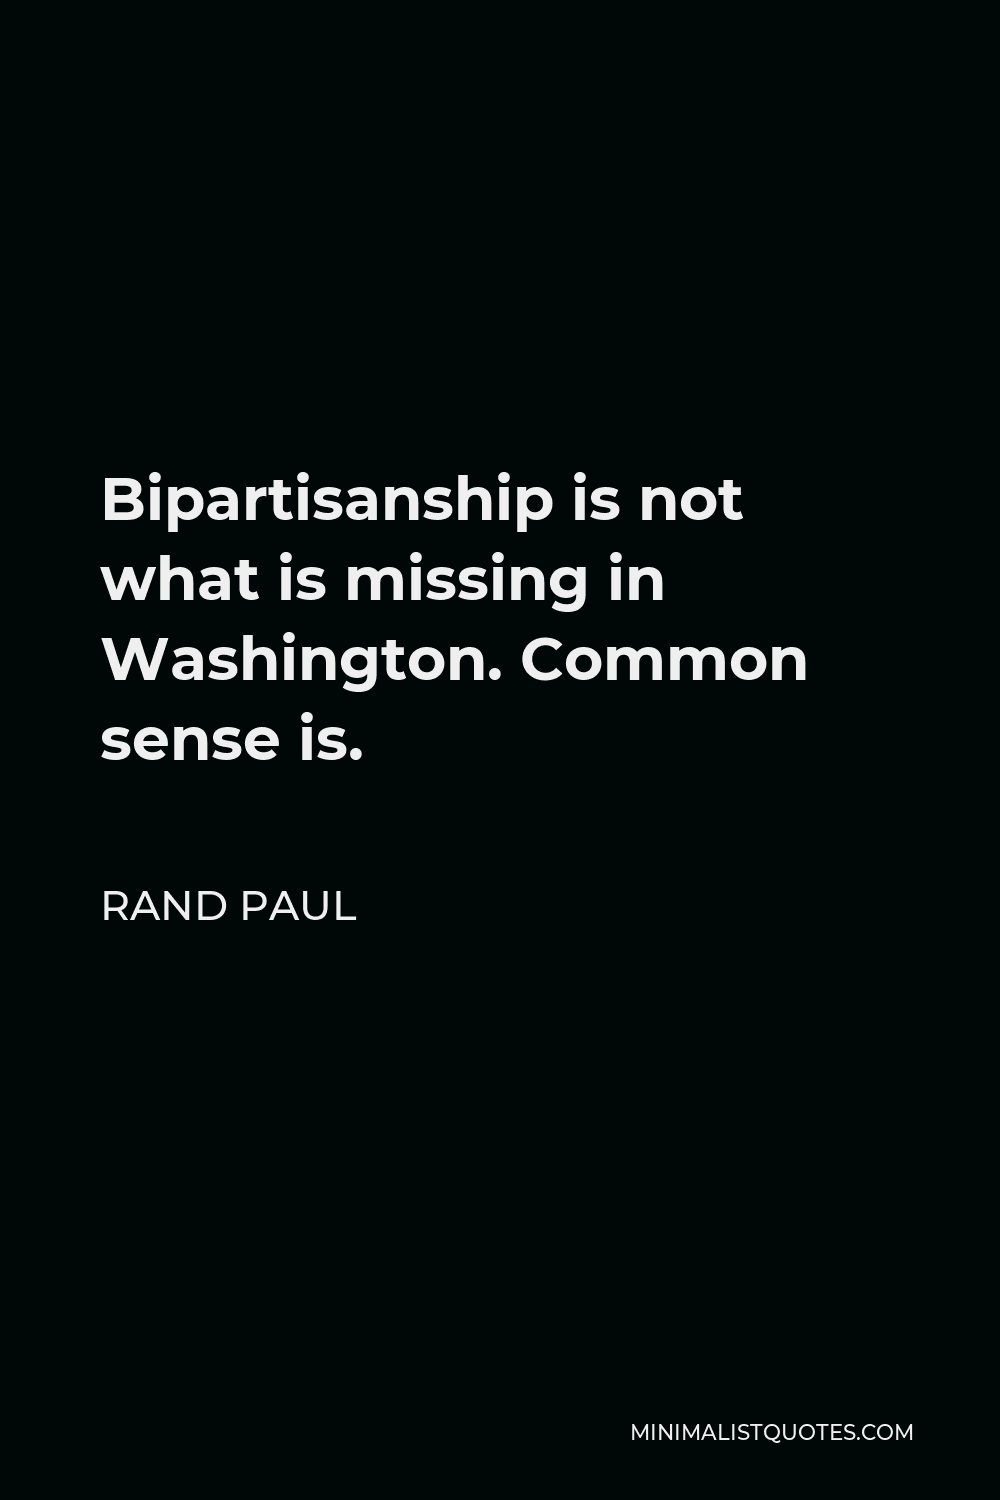 Rand Paul Quote - Bipartisanship is not what is missing in Washington. Common sense is.